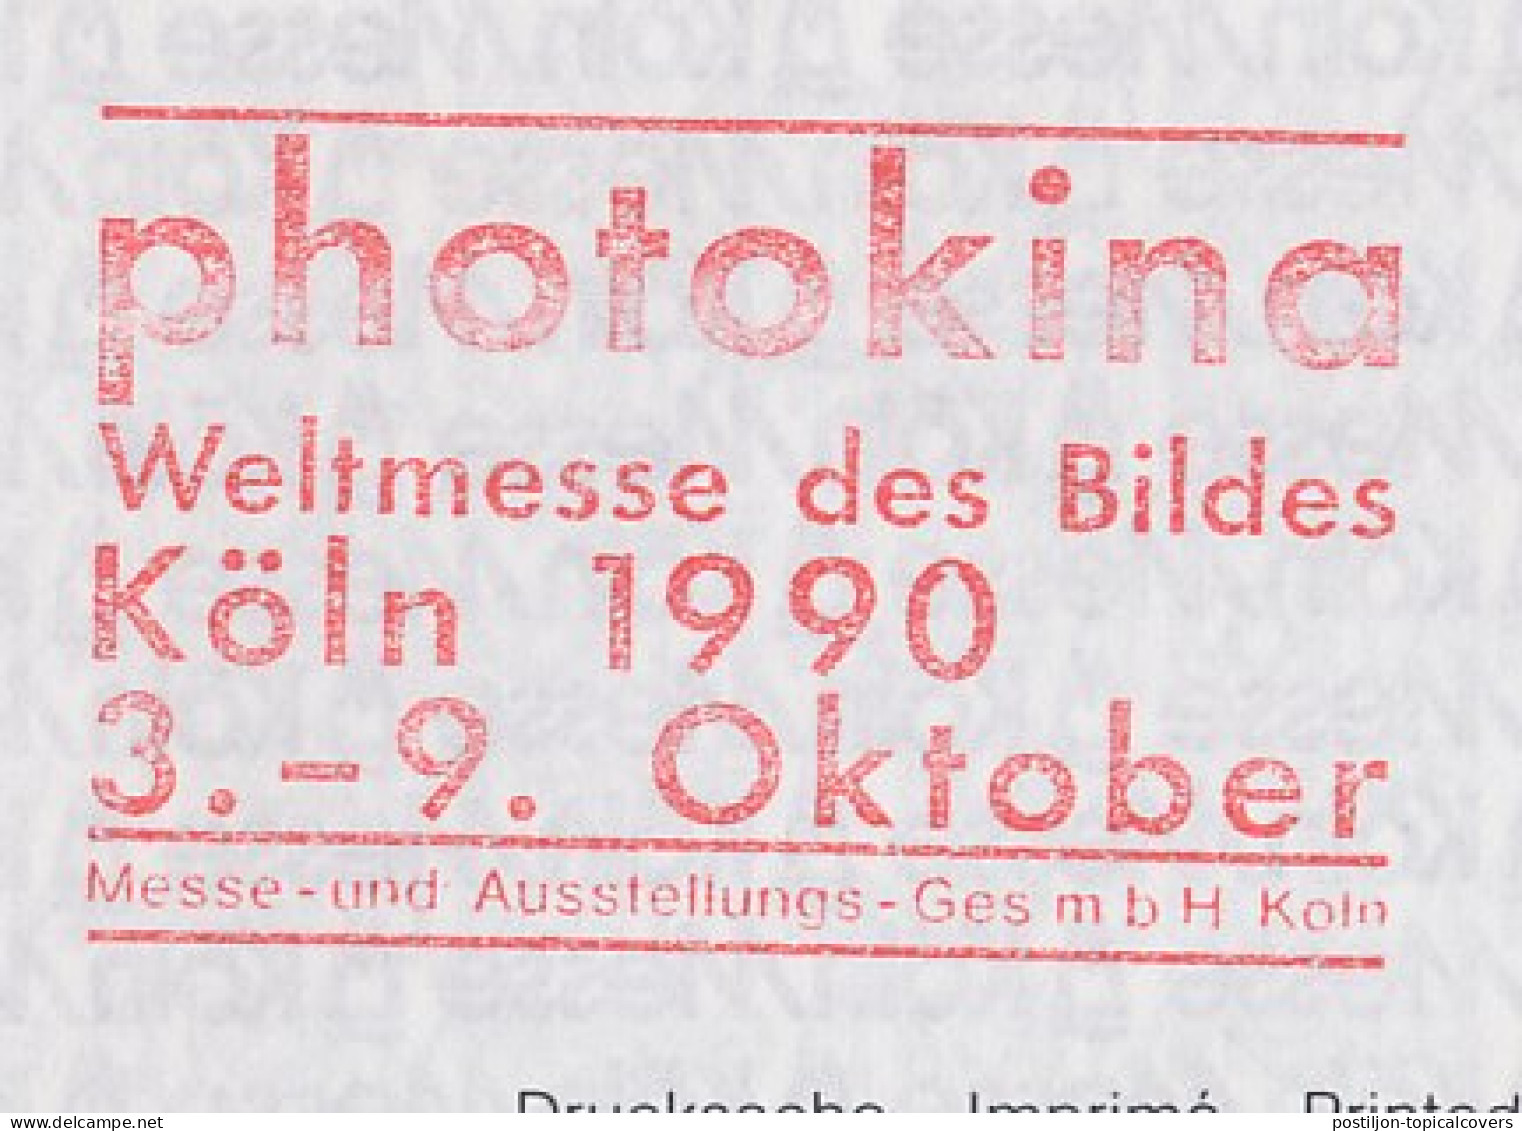 Meter Cover Germany 1990 Photokina - Worlds Fair Of Image - Photography